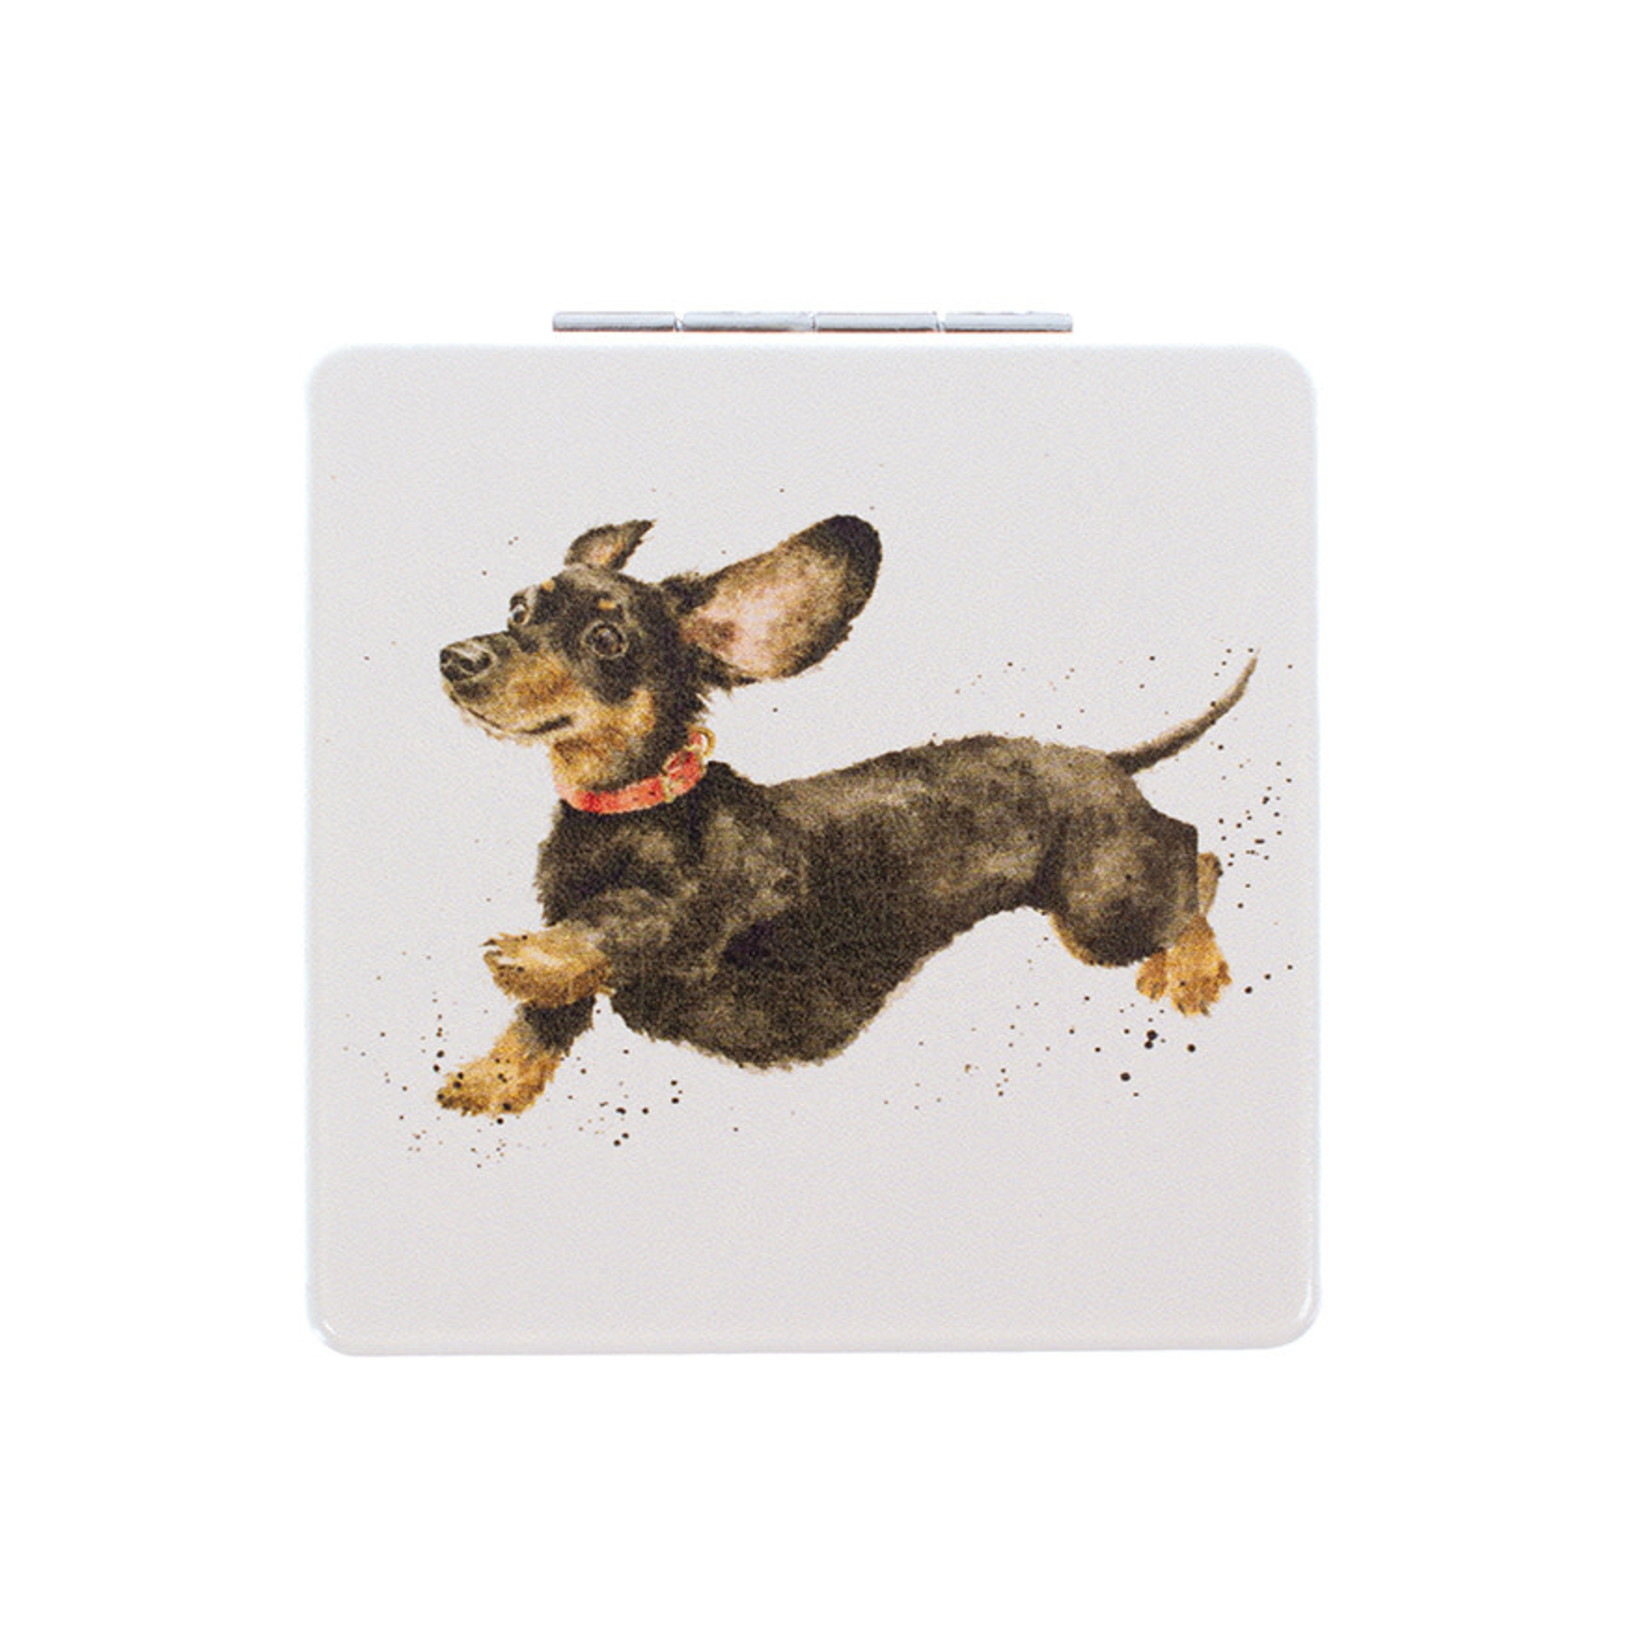 Wrendale Designs MR007 Compact Mirror - 'That Friday Feeling' Dachshund